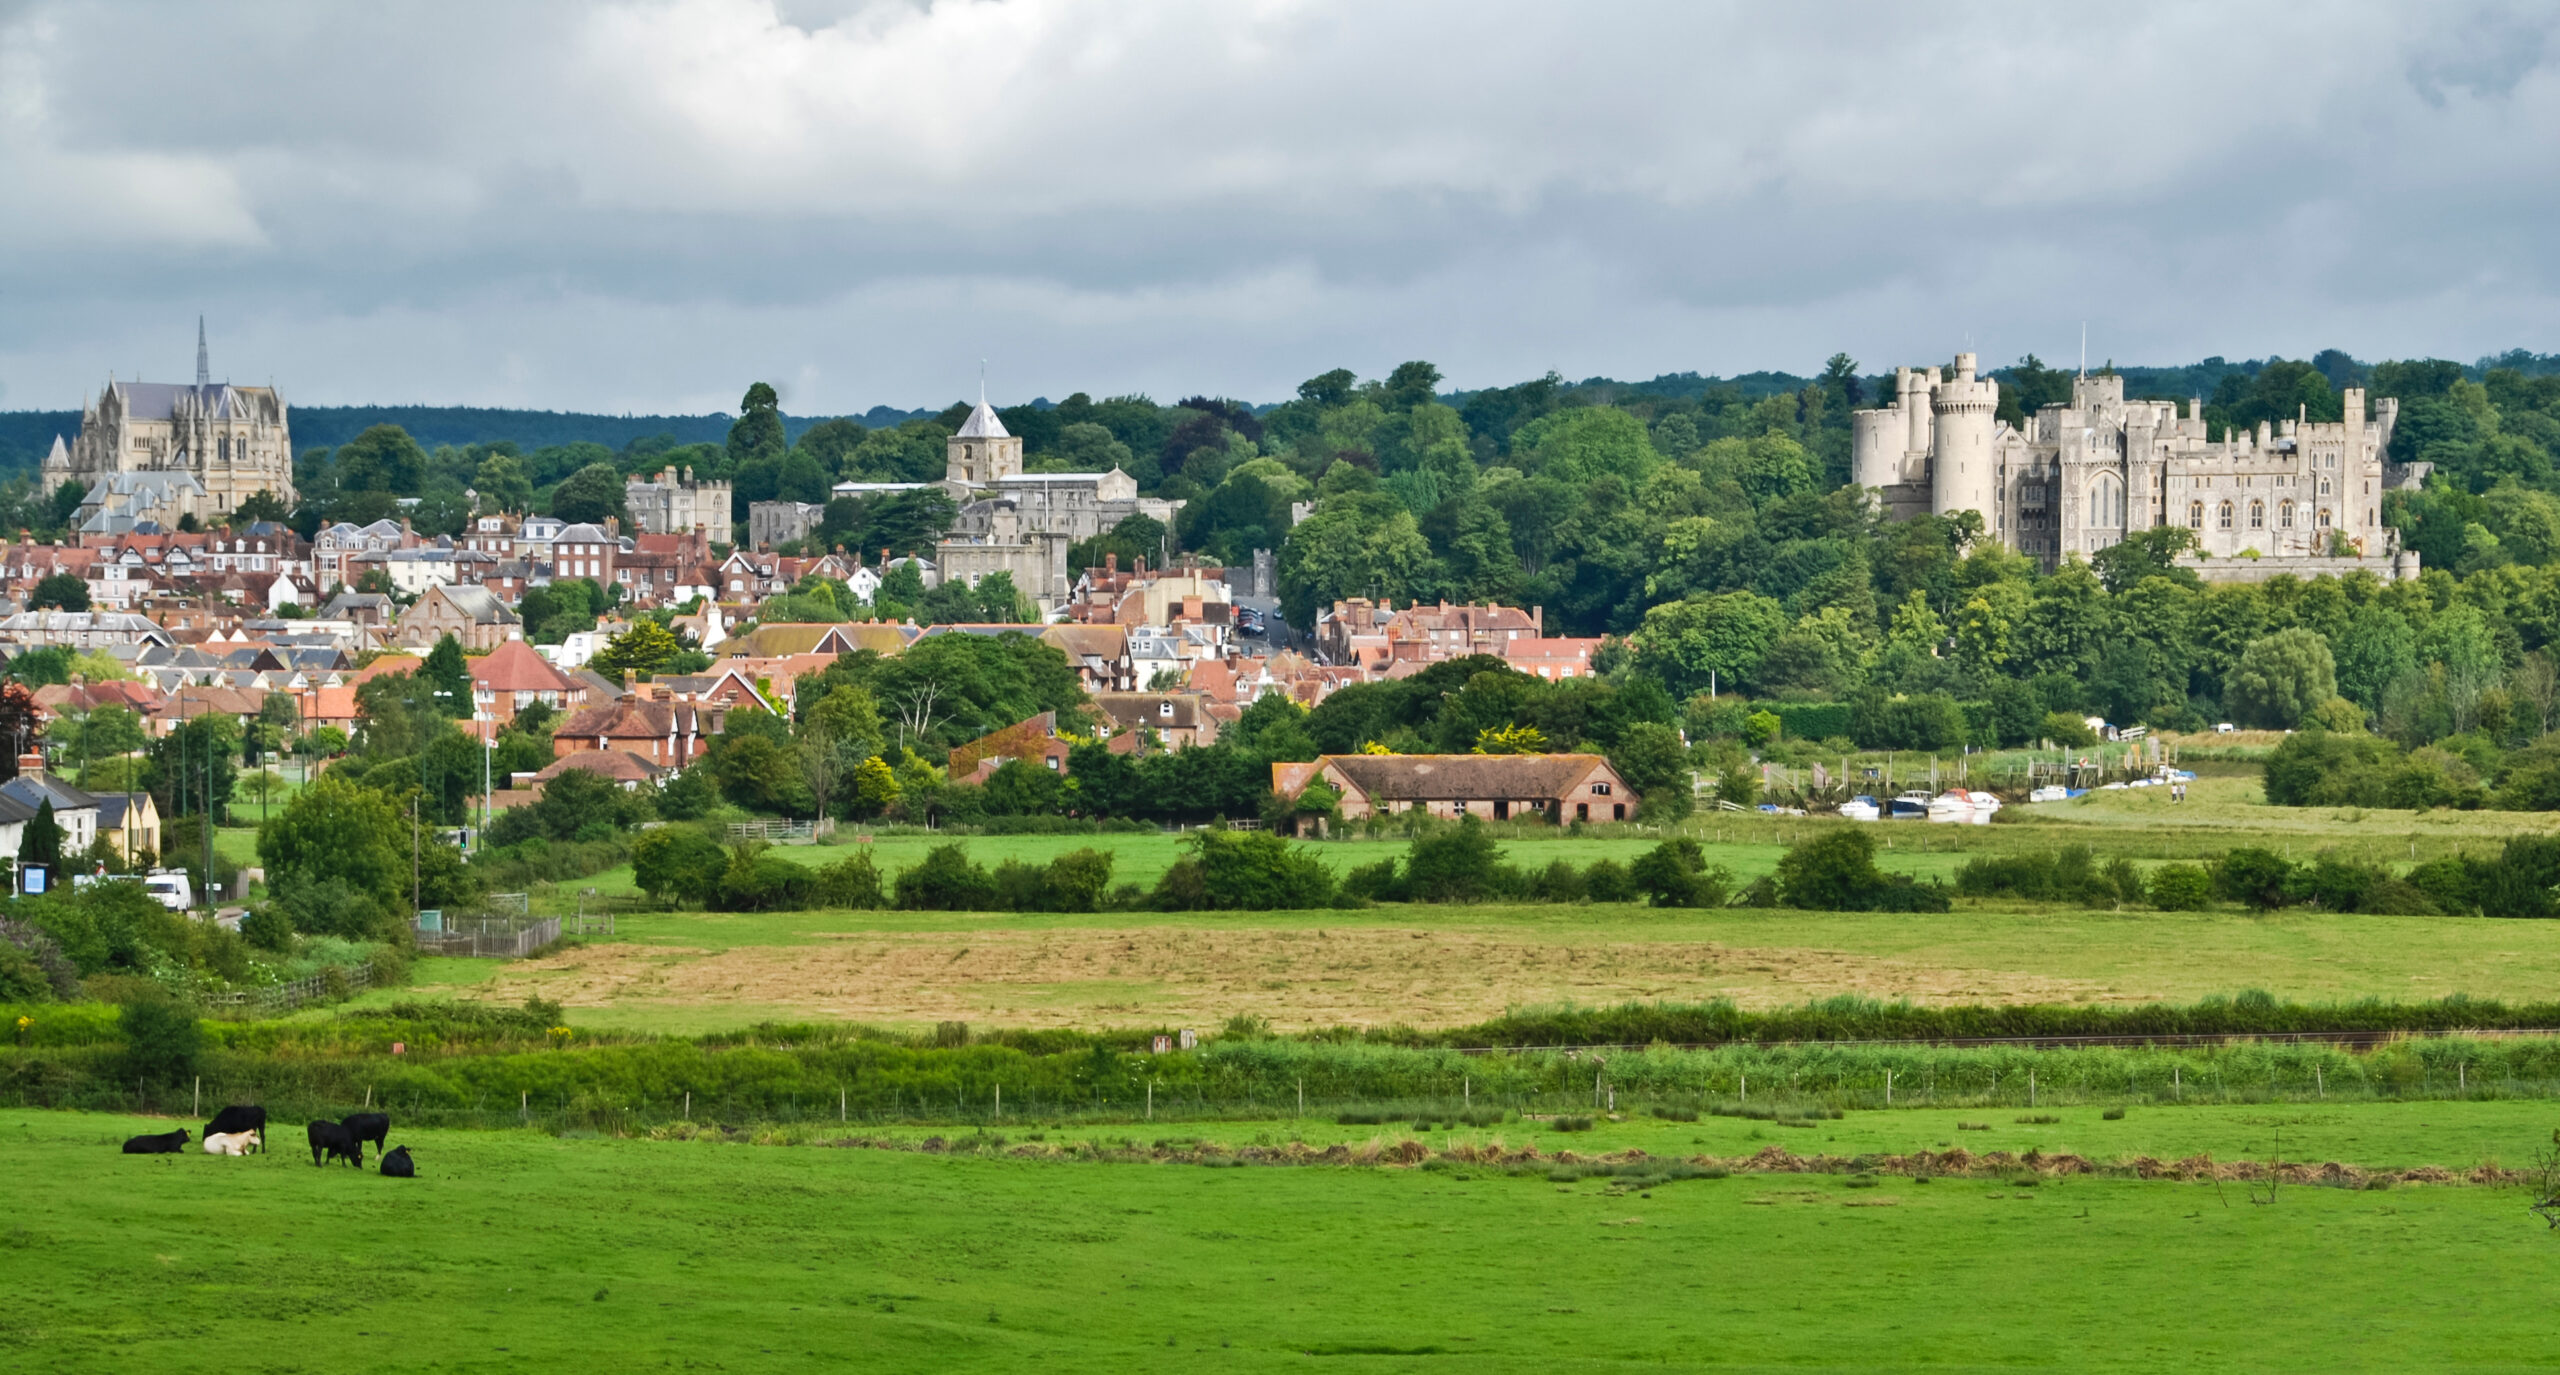 Beautiful historical town of Arundel in West Sussex, Great Britain